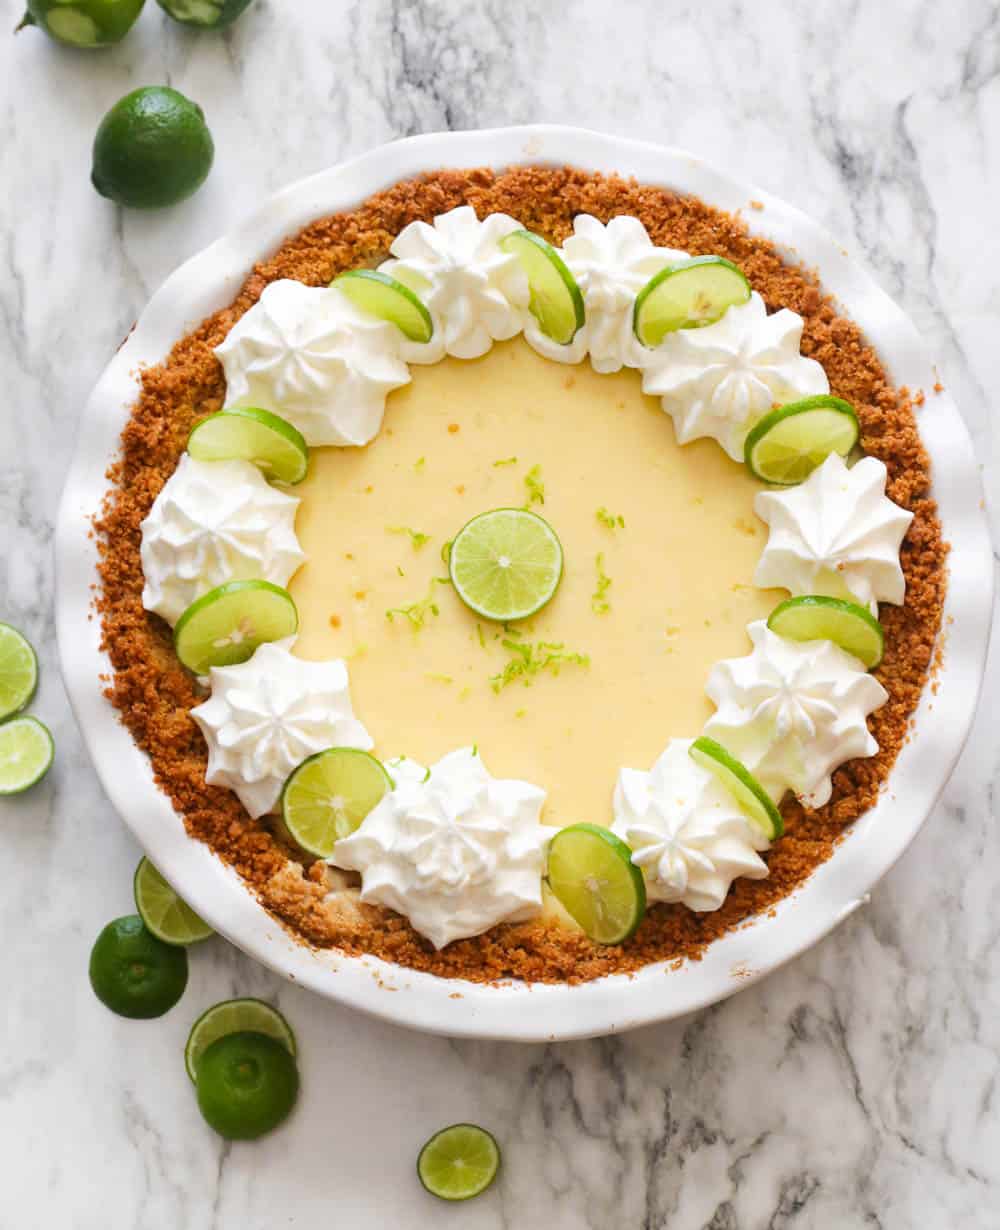 Beautifully decorated key lime pie